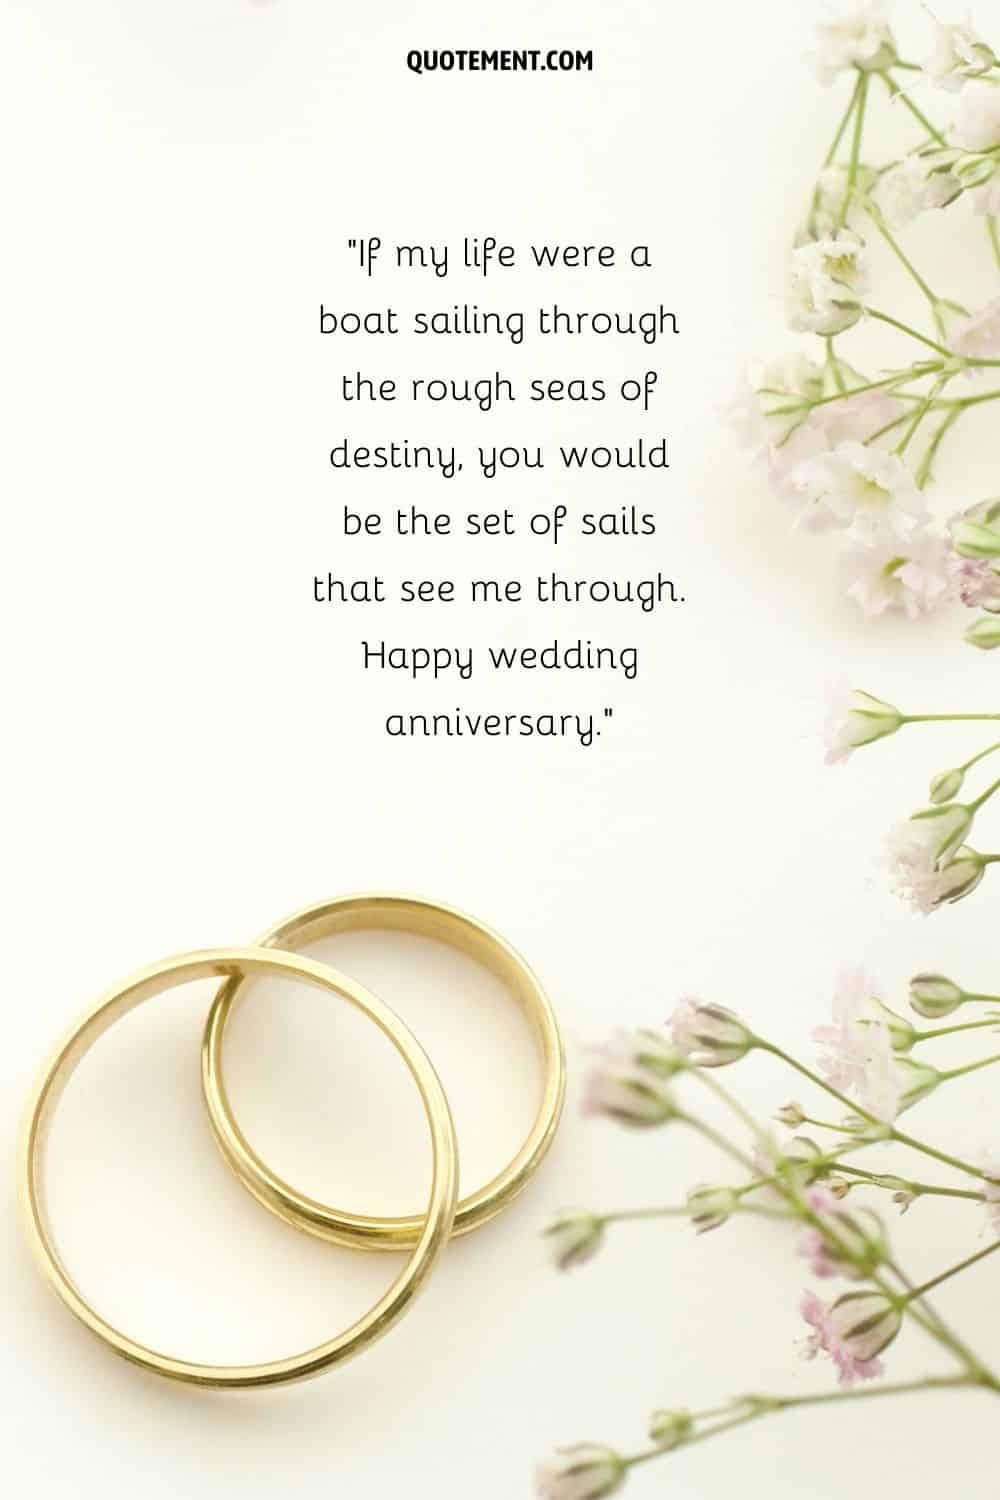 wedding rings for him and her representing happy wedding anniversary quote for wife